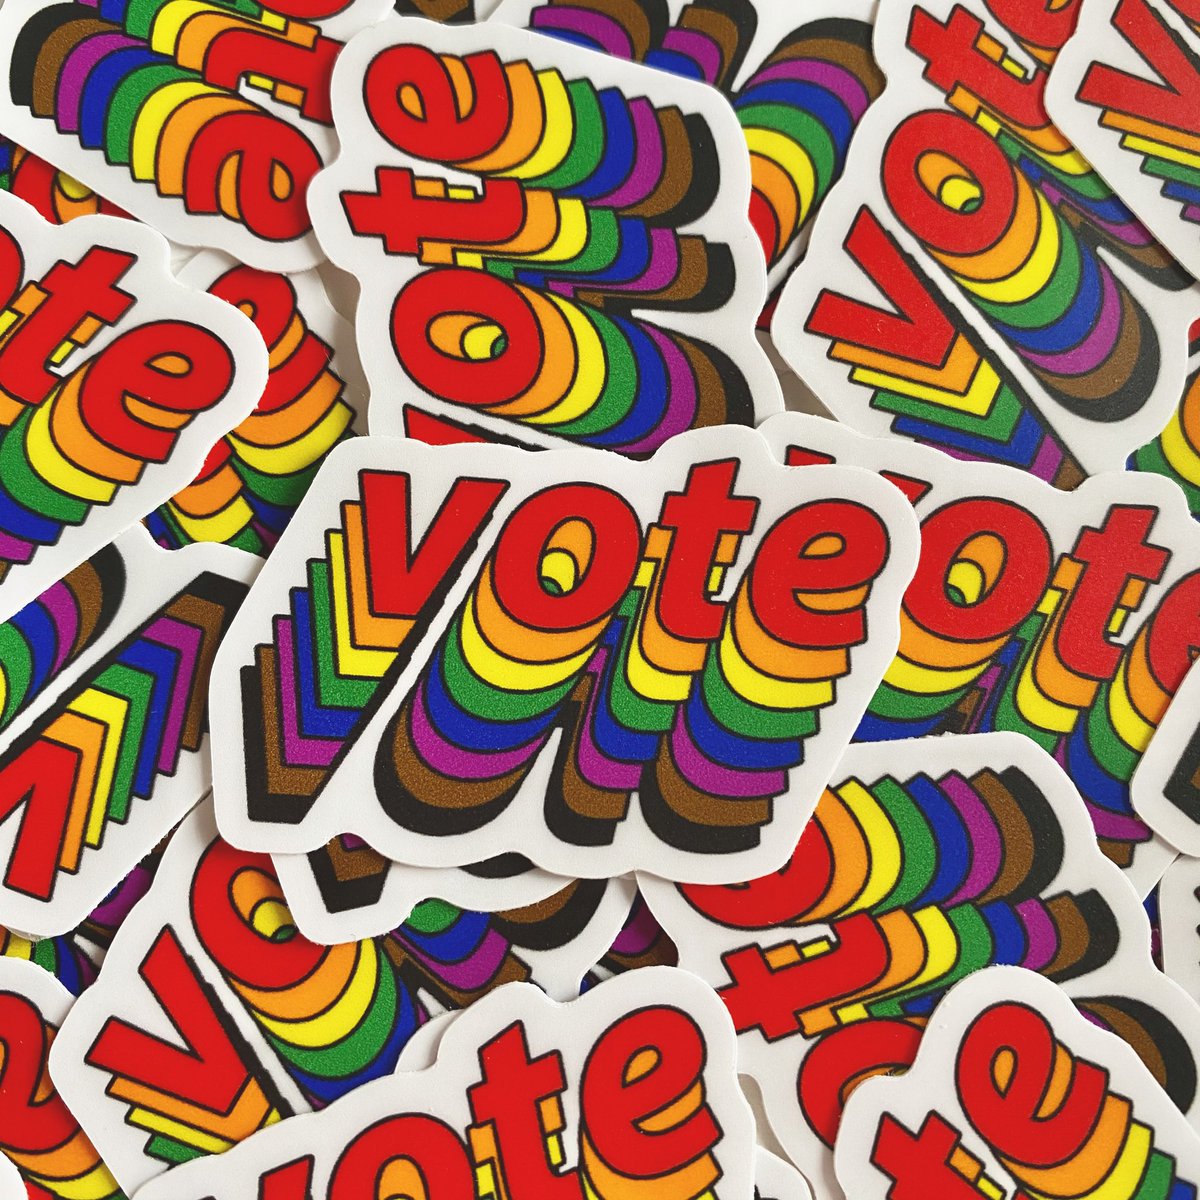 I recently created stickers of different pronouns for people to wear and share. And I included a vote sticker in this batch too! Both issues are different but very important to me year round - especially in such an important time for the LGBTQ community. 